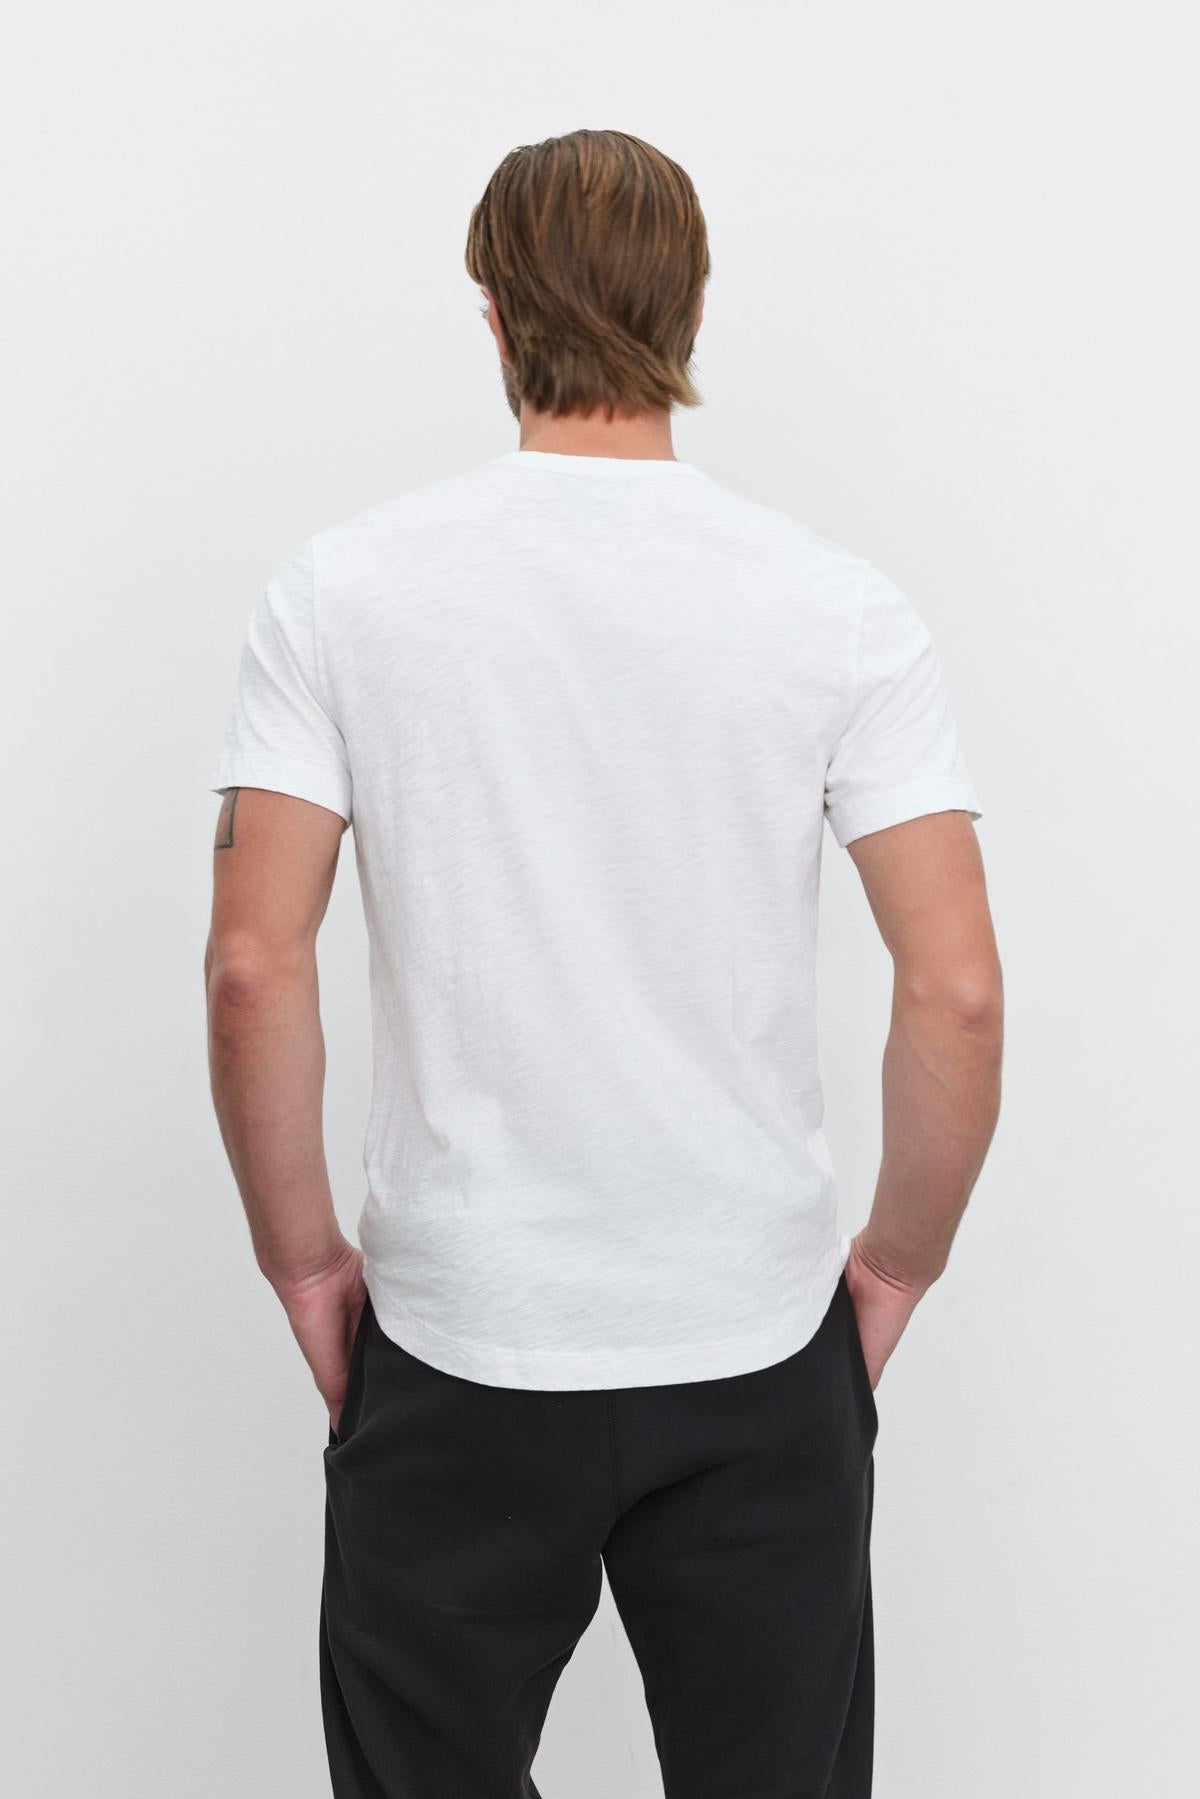 The back of a man wearing a Velvet by Graham & Spencer AMARO CREW NECK SLUB TEE with a curved hemline and black pants.-35867457585345